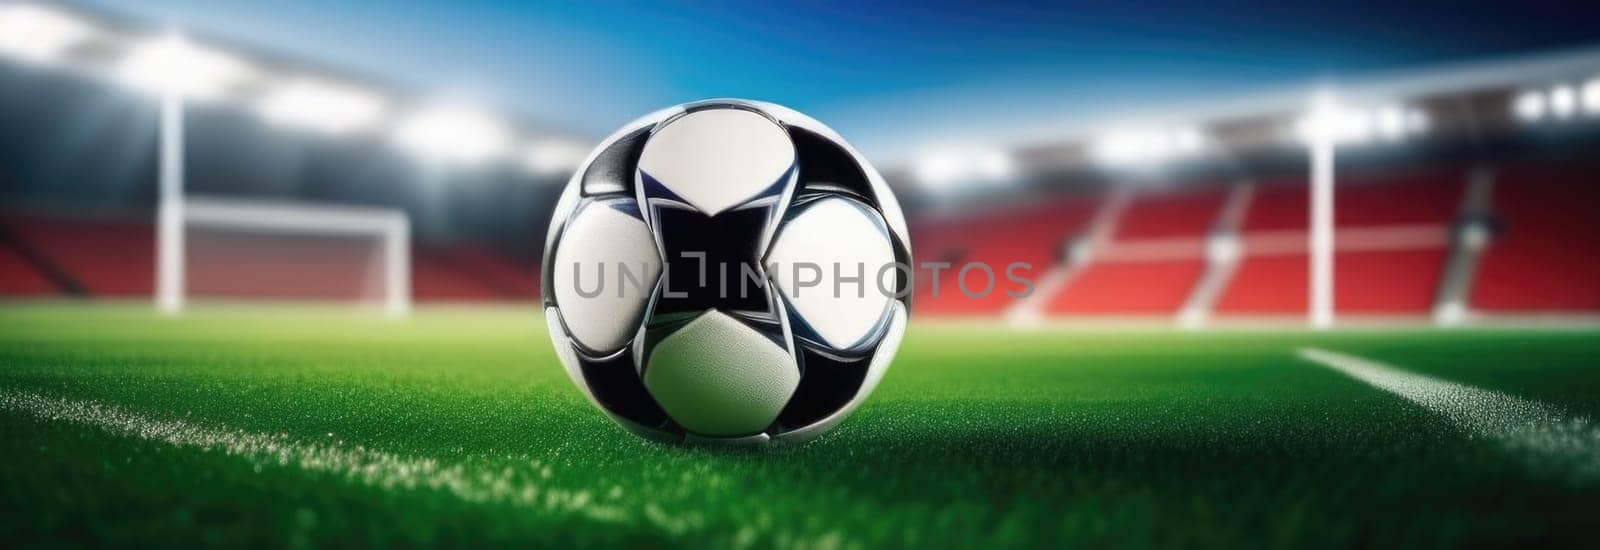 Soccer ball rests on grass of green field in front of majestic lit up, creating exciting atmosphere stadium. Scene captures essence of game, ready for action, excitement. Advertising, banner, print. by Angelsmoon